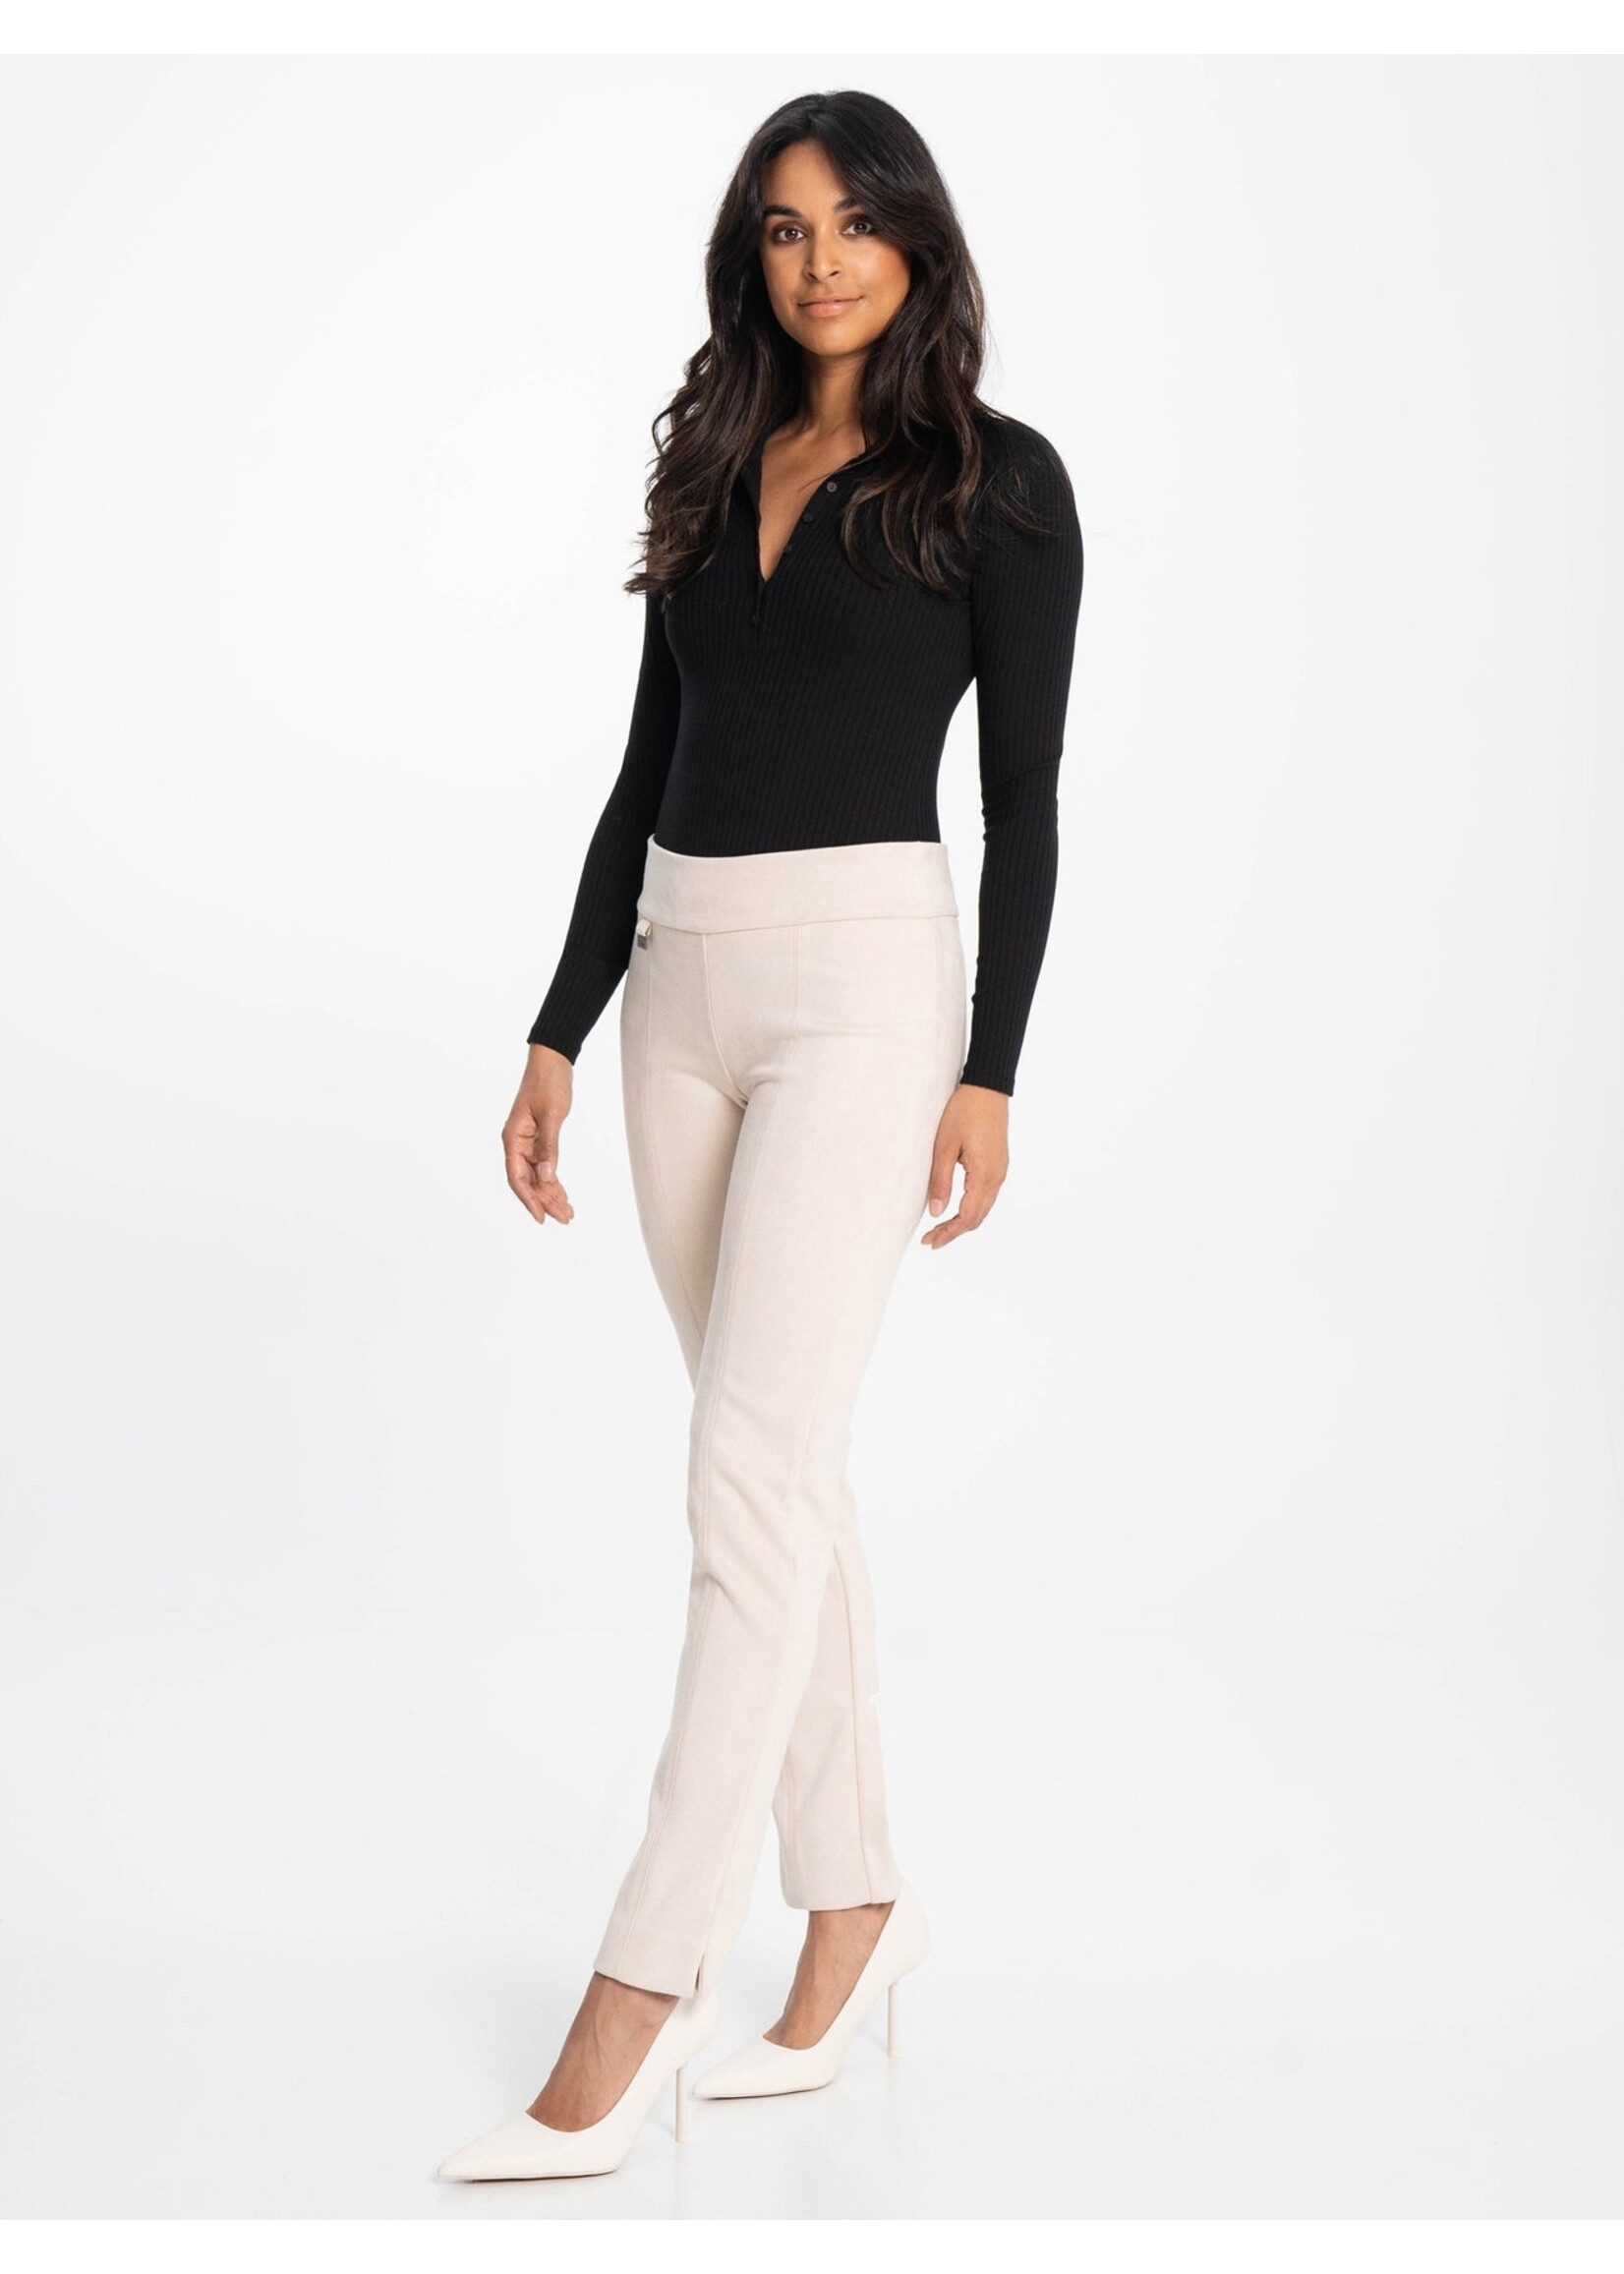 LOIS JEANS & JACKETS Women's pull-on suede pants